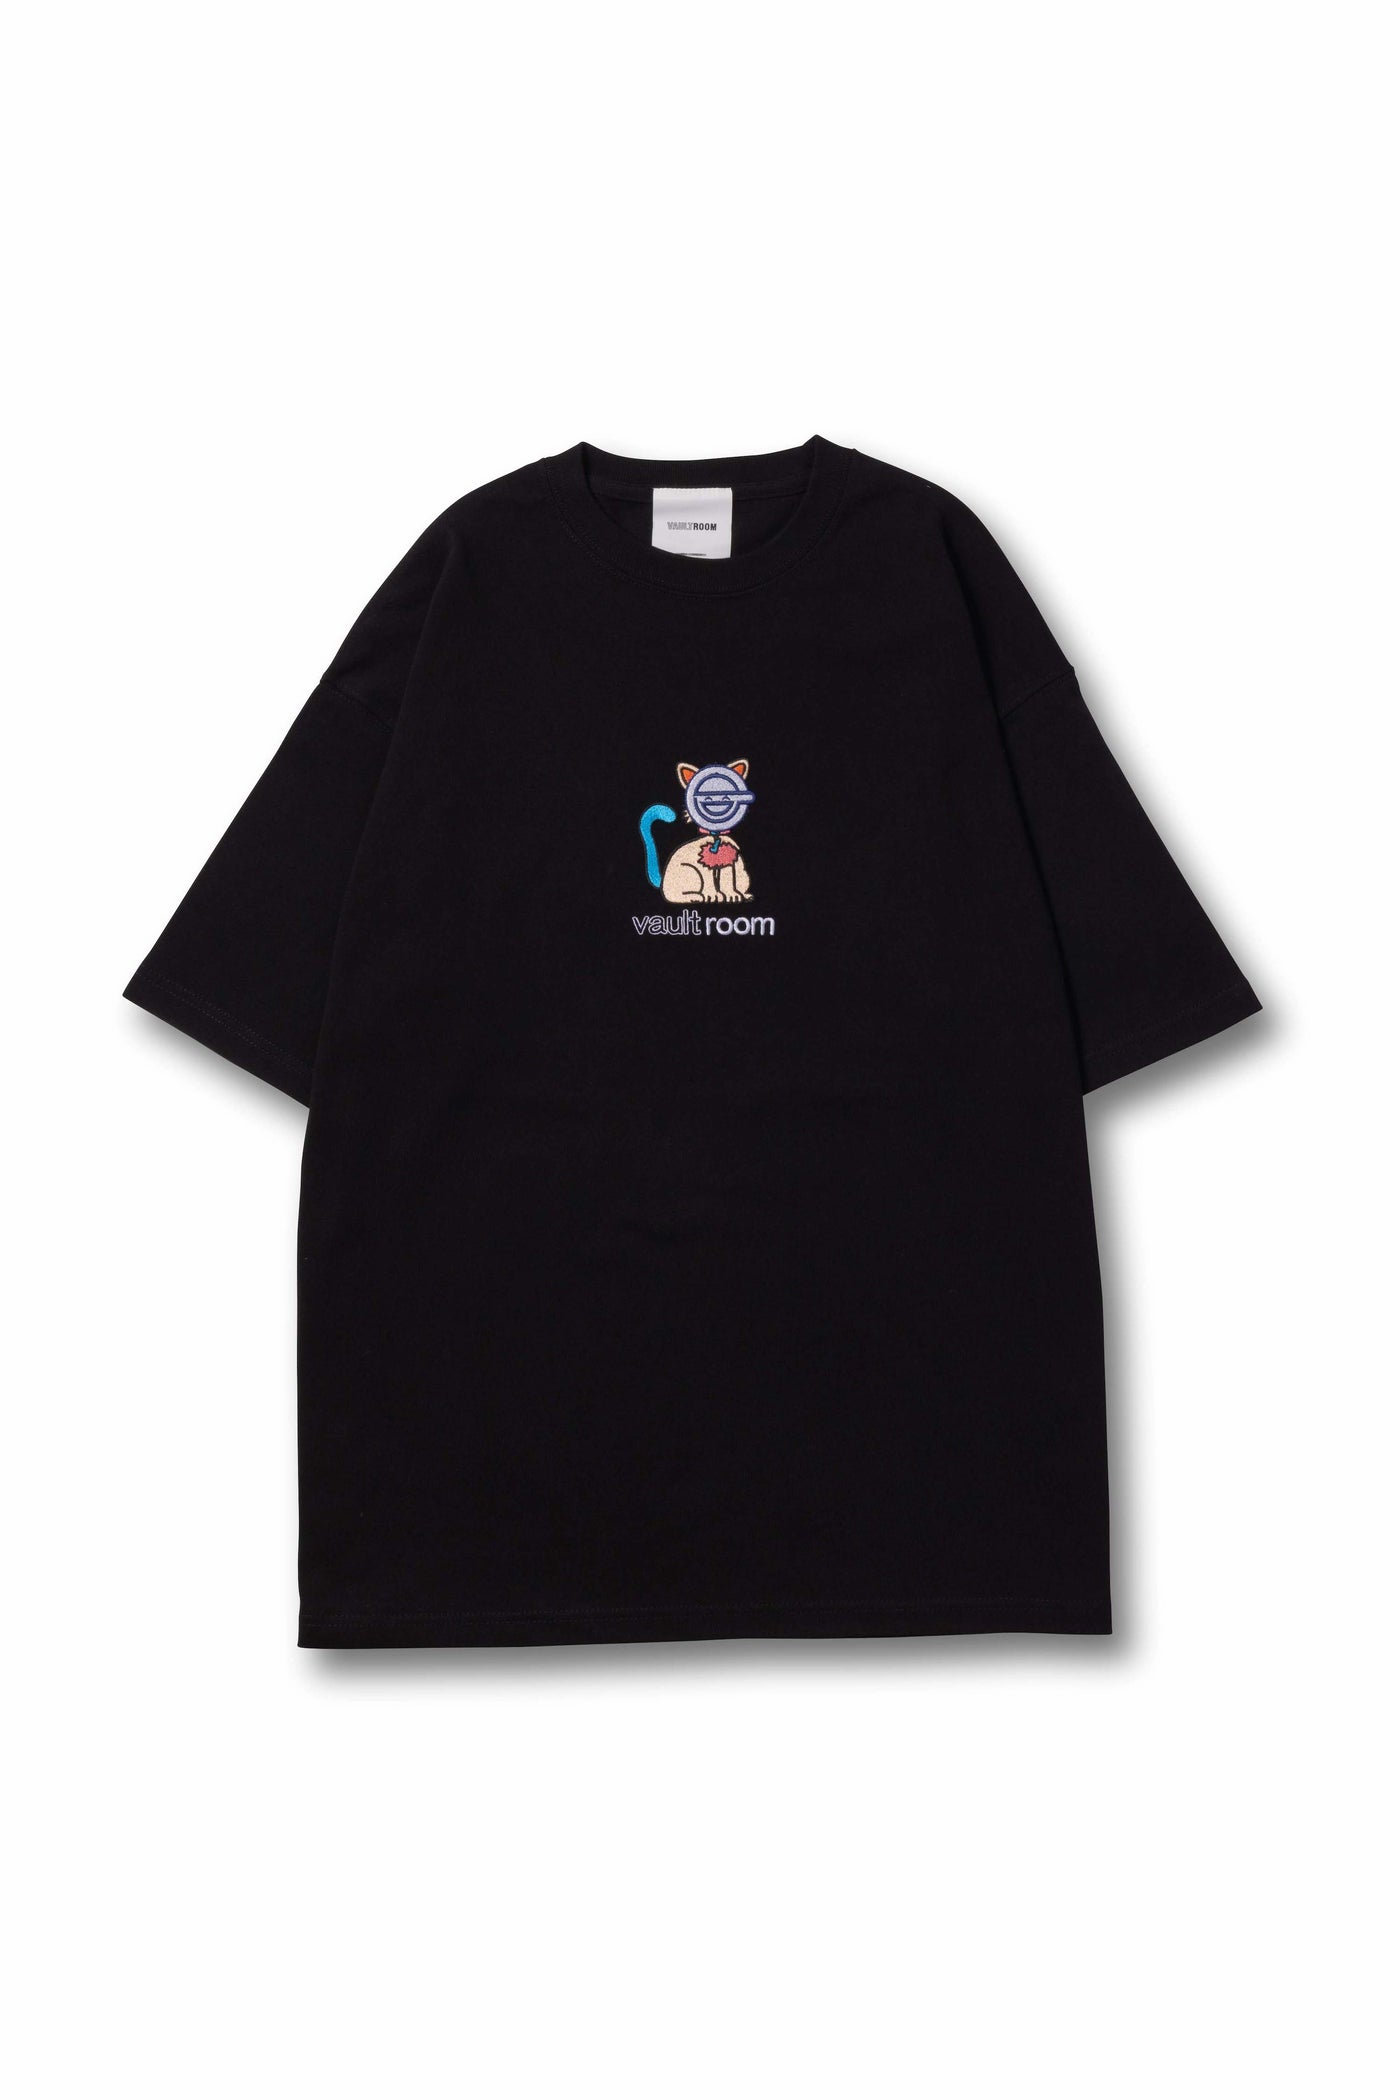 sellyvaultroom THE LAUGHING MAN TEE / BLK